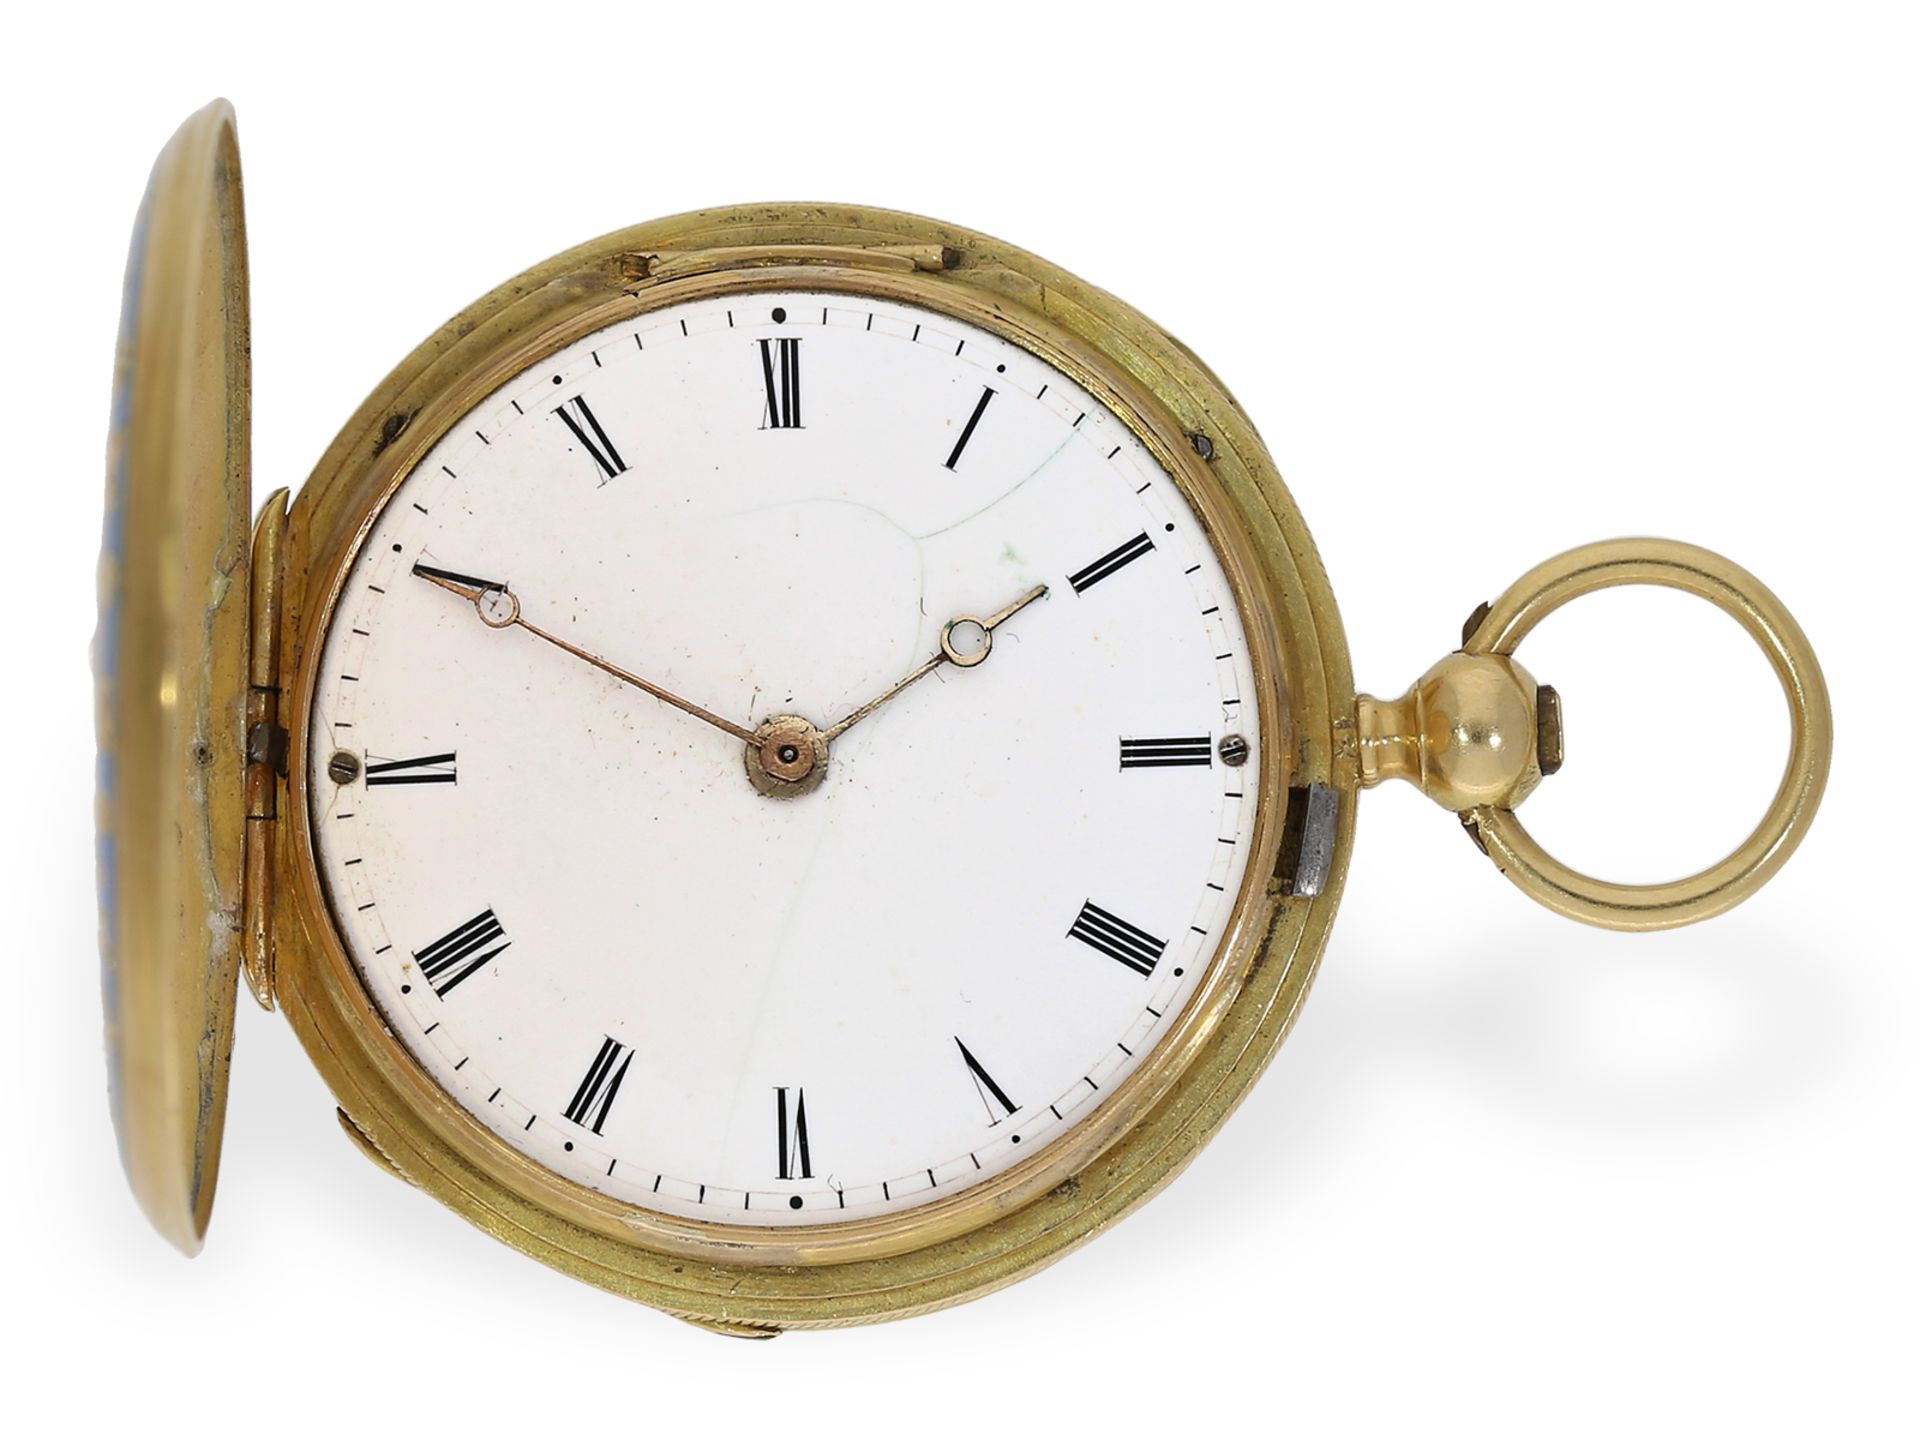 Pocket watch: top-quality gold/enamel hunting case watch, Henry Capt Geneve, ca. 1830 - Image 4 of 10